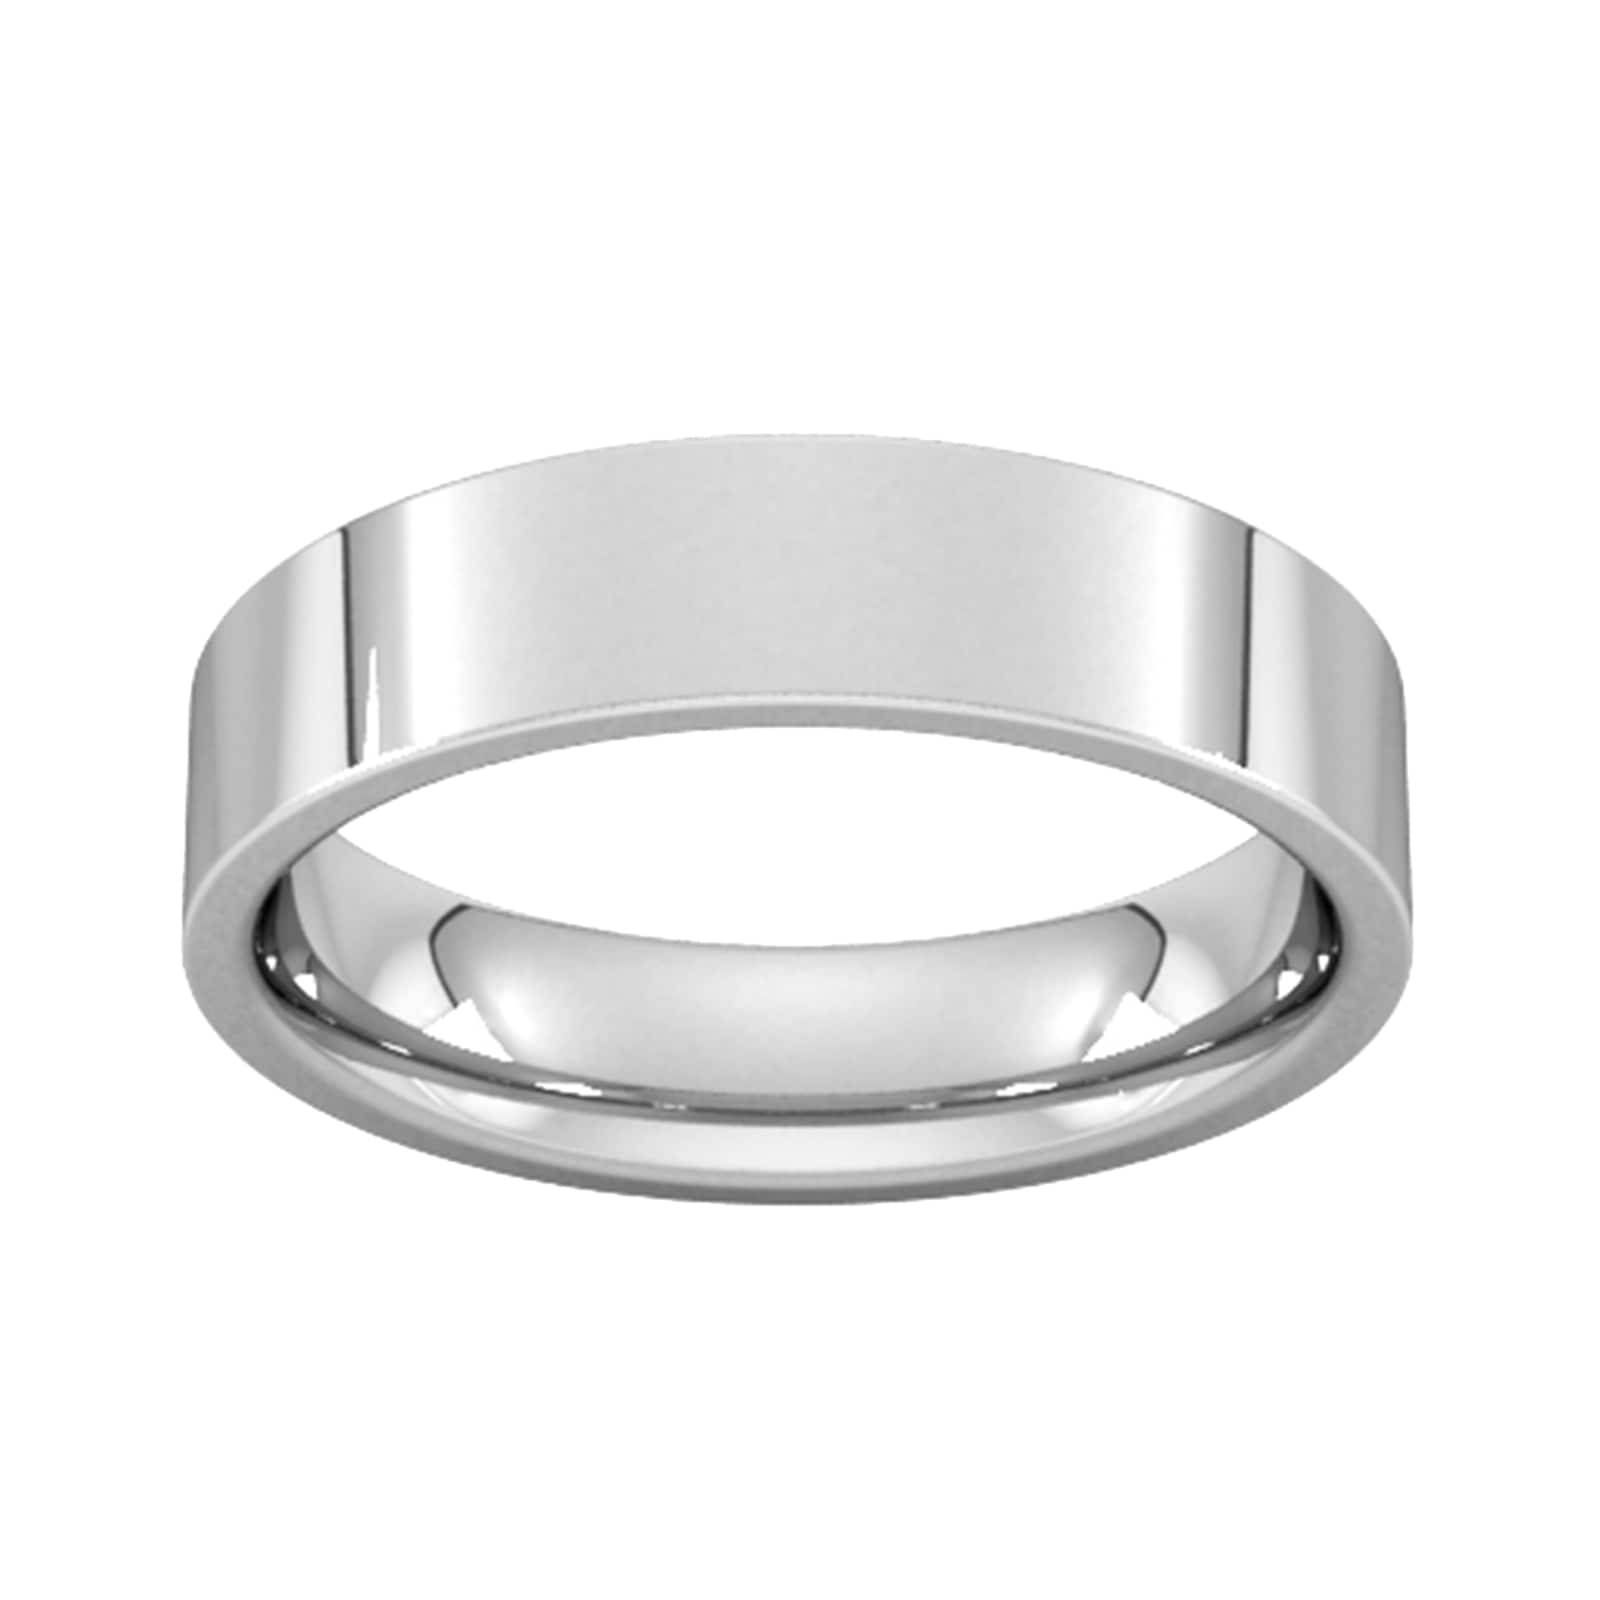 5mm Flat Court Heavy Wedding Ring In 18 Carat White Gold - Ring Size Q